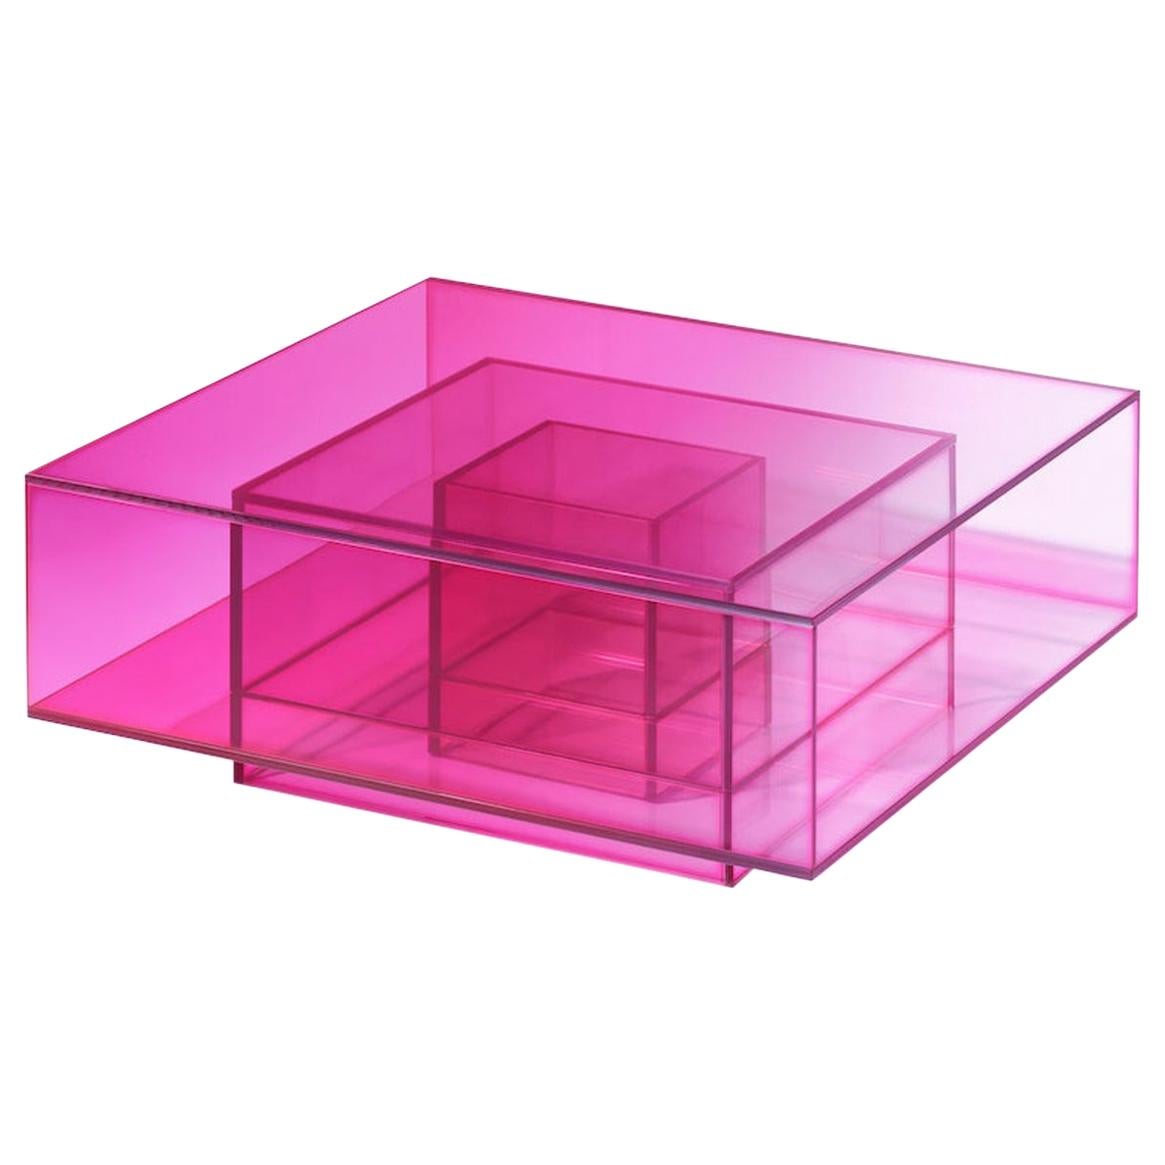 Studio Buzao, Null Coffee Table Hot Pink Edition, Laminated Glass